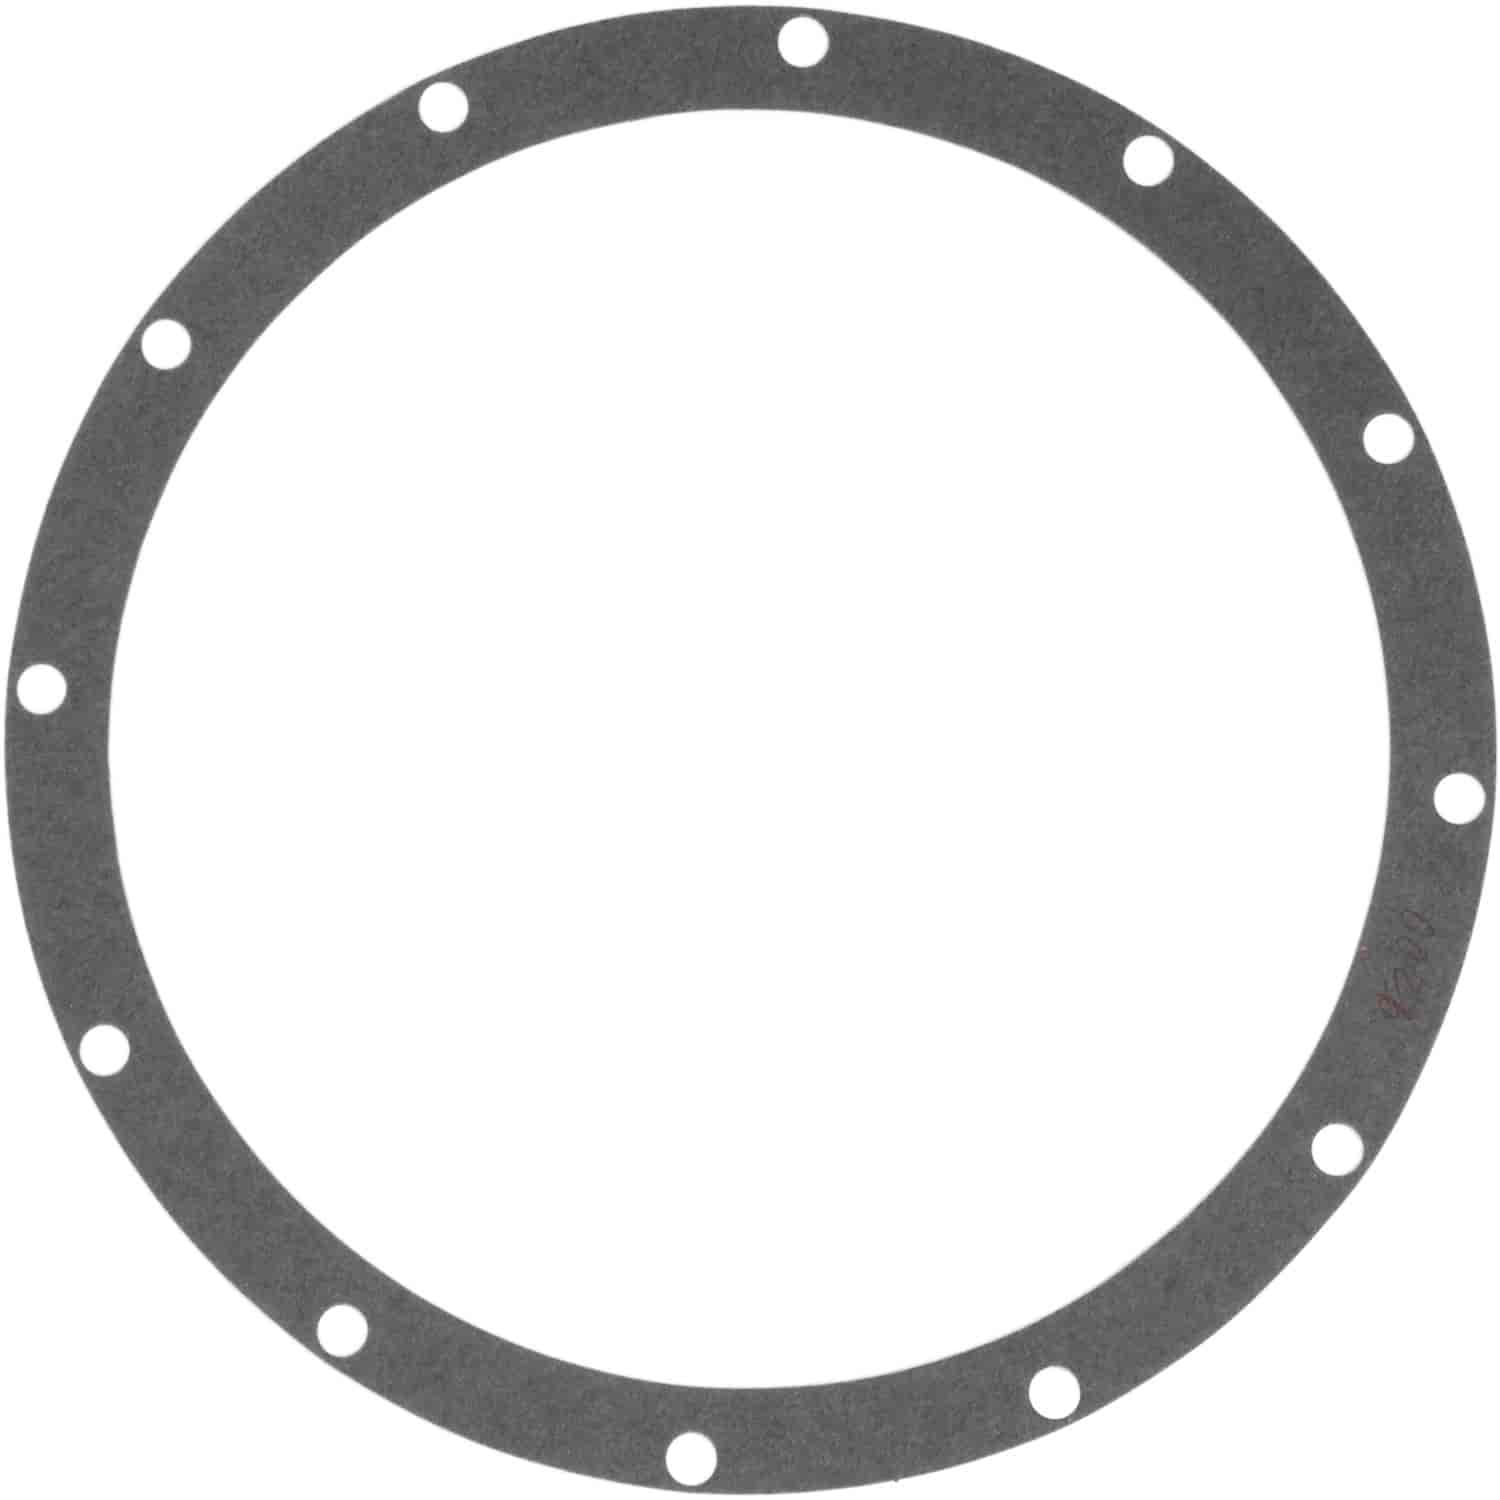 Differential Cover Gasket Jeep 12-Bolt